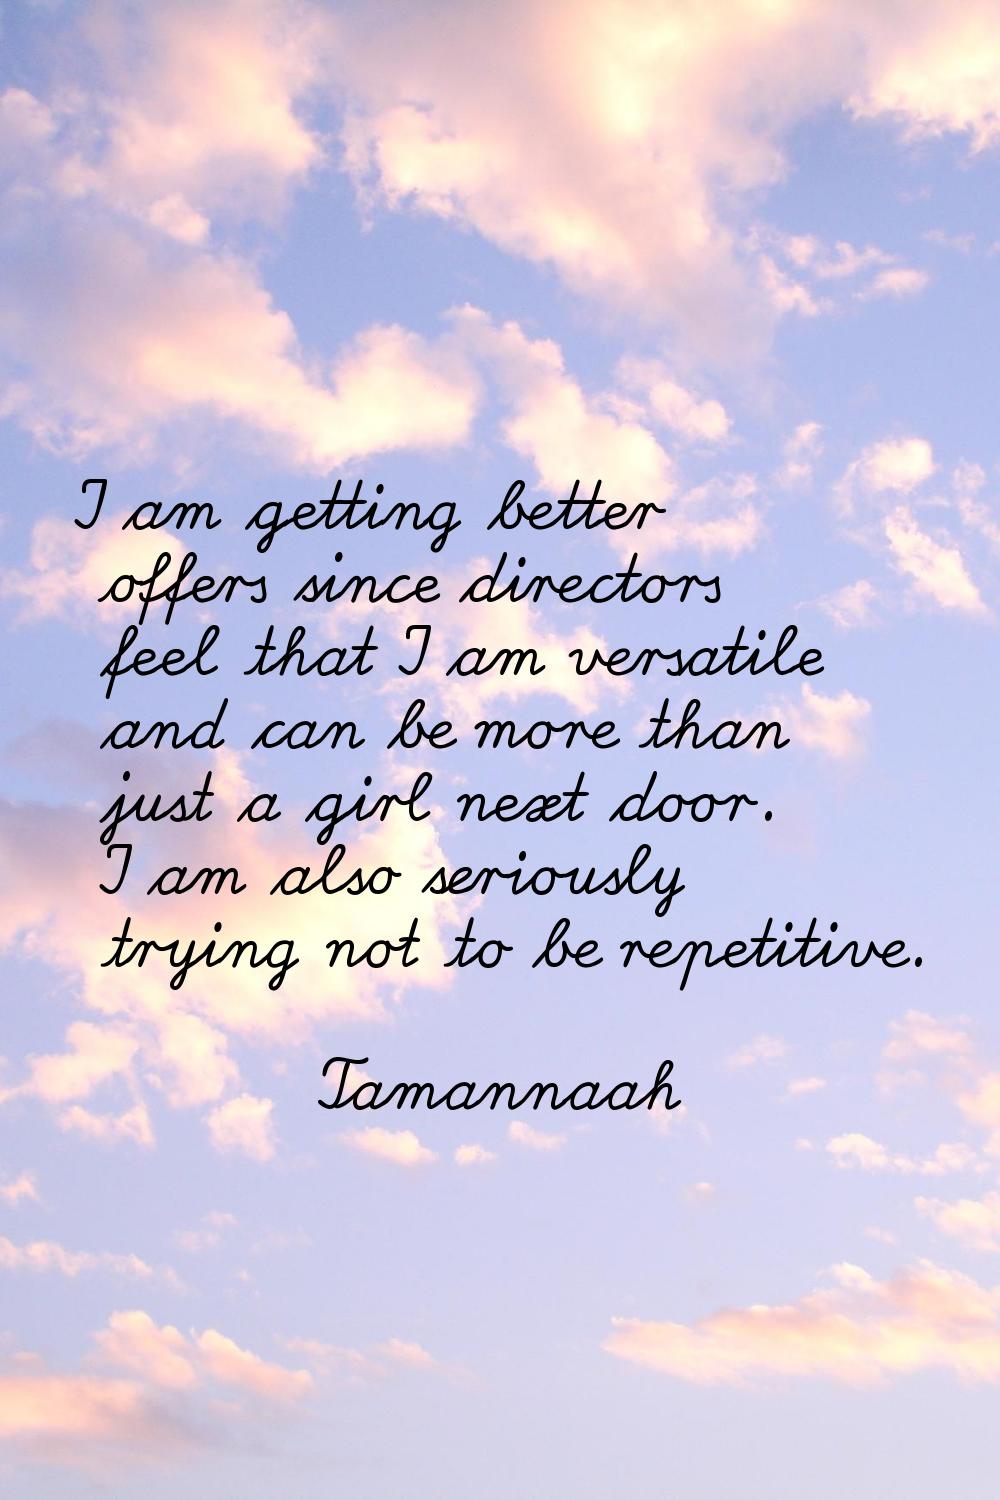 I am getting better offers since directors feel that I am versatile and can be more than just a gir